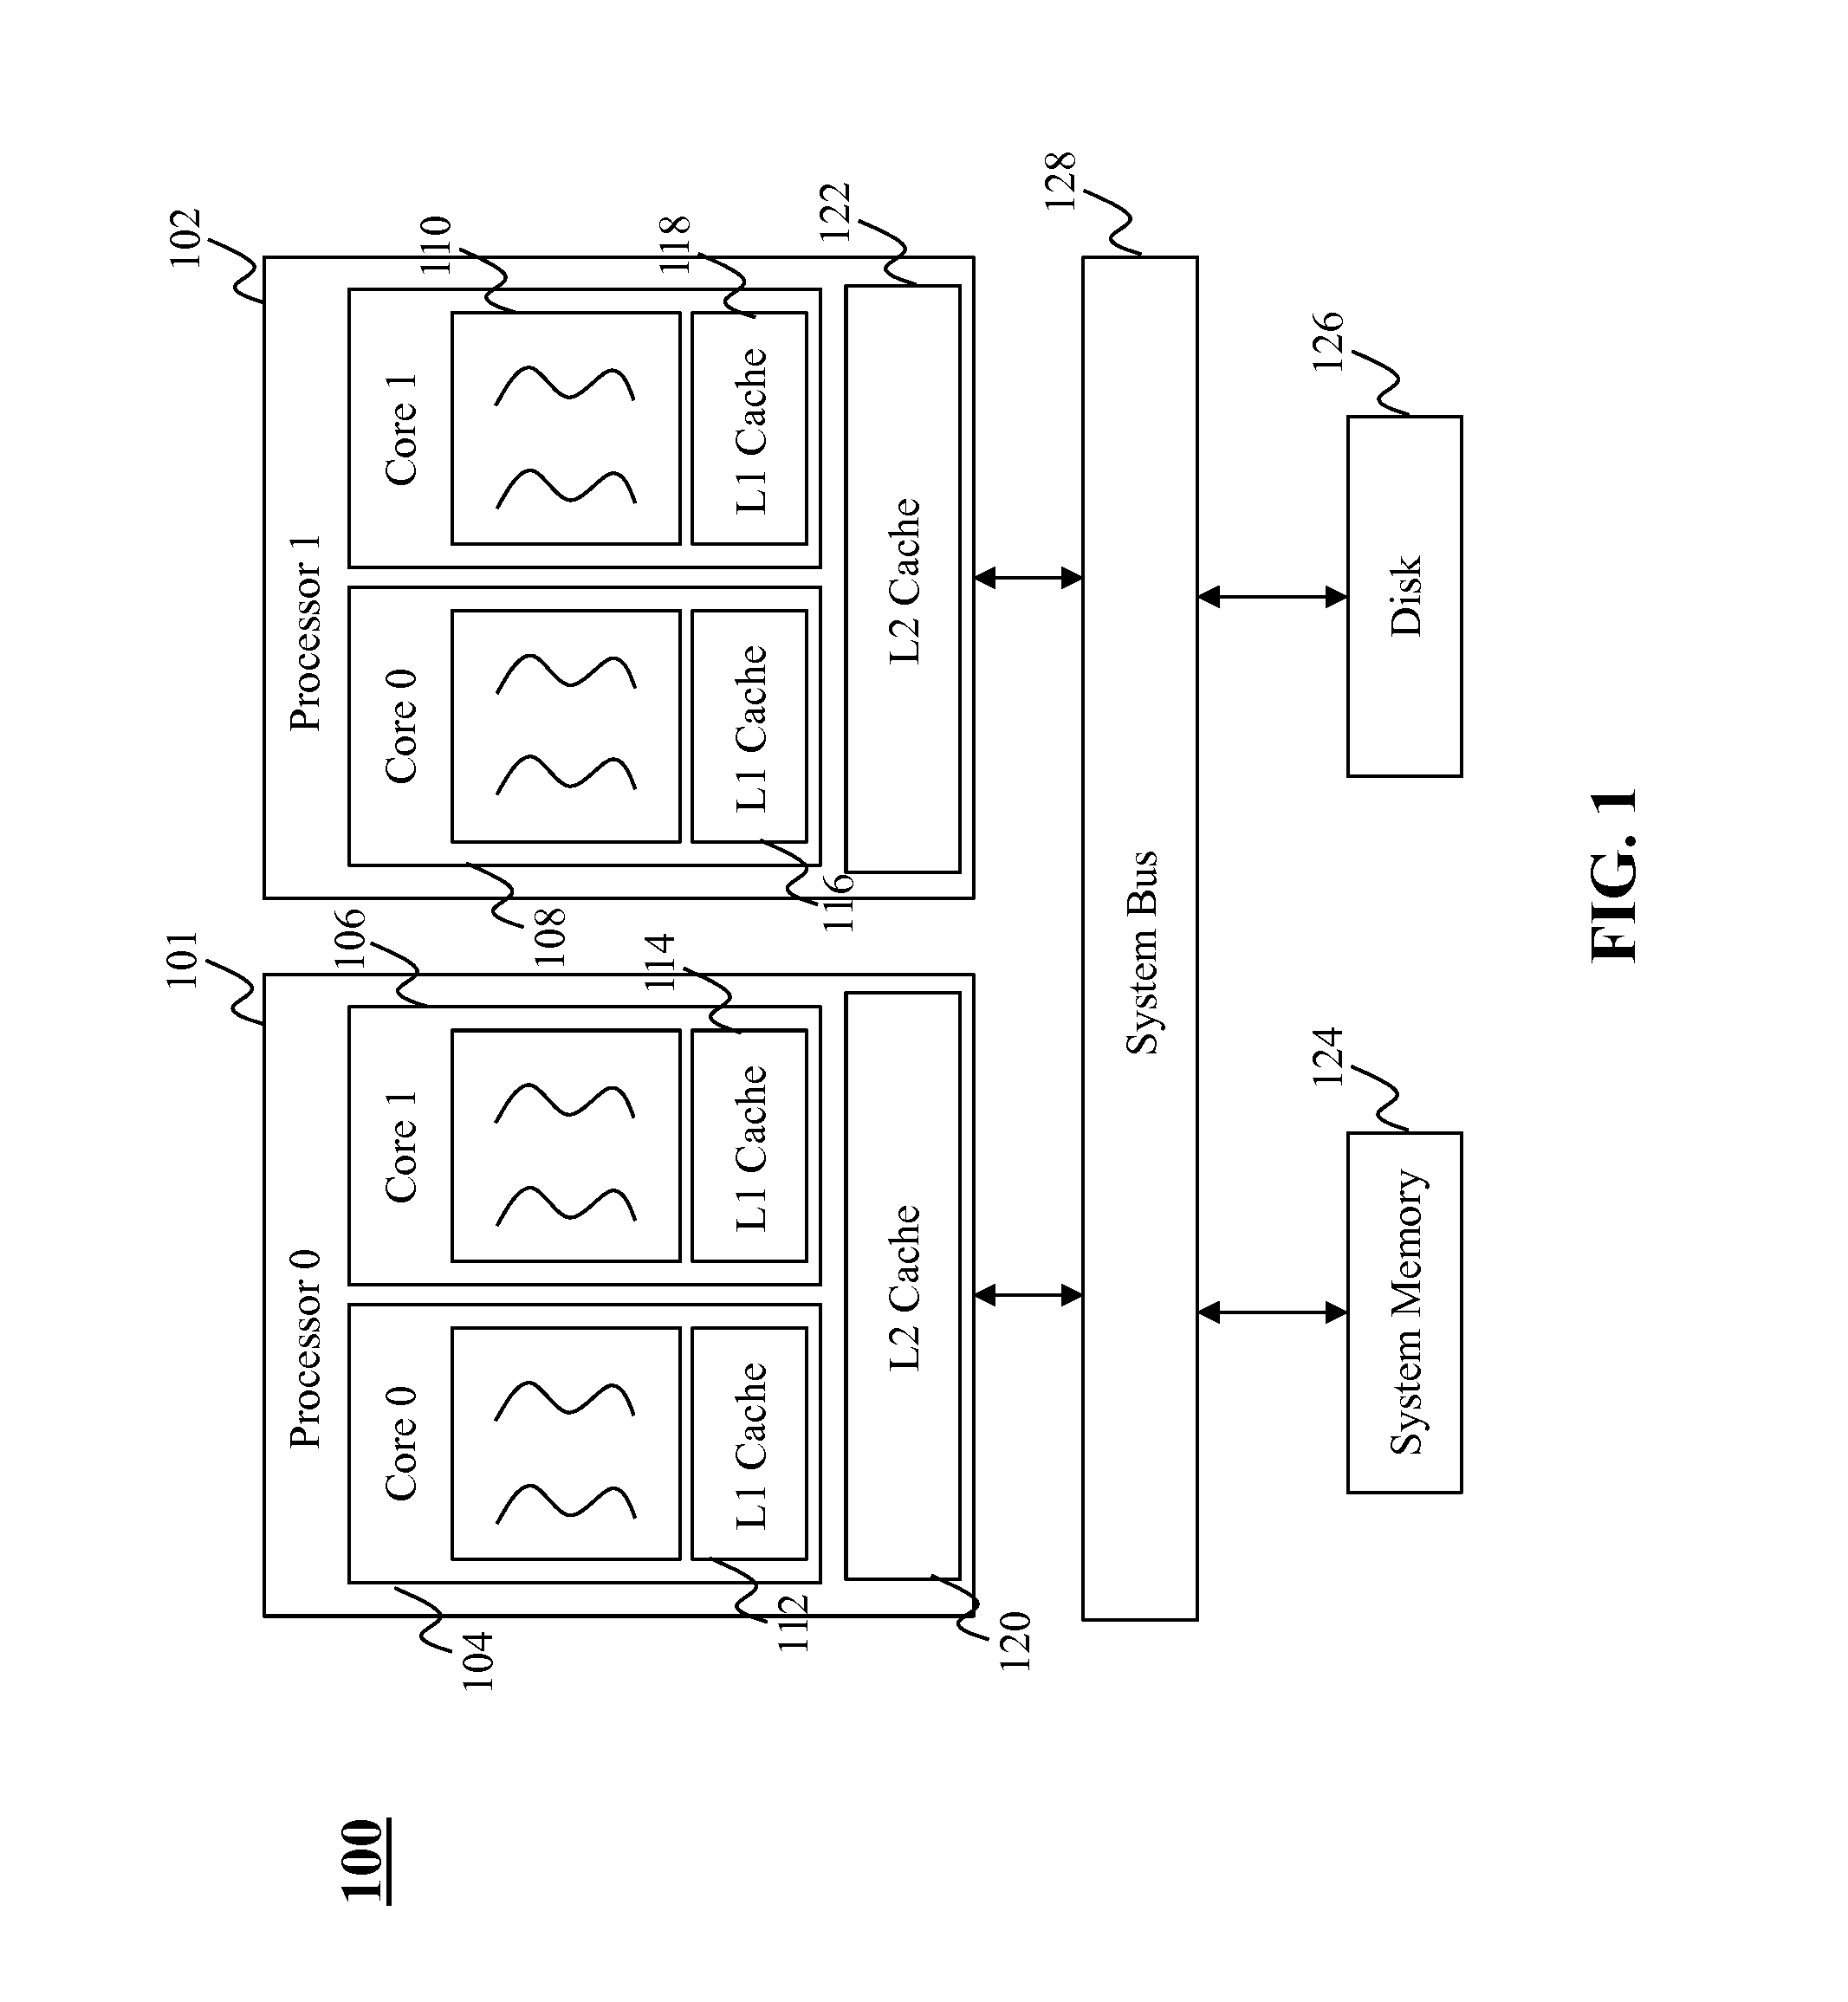 Method and system for concurrency control in log-structured merge data stores